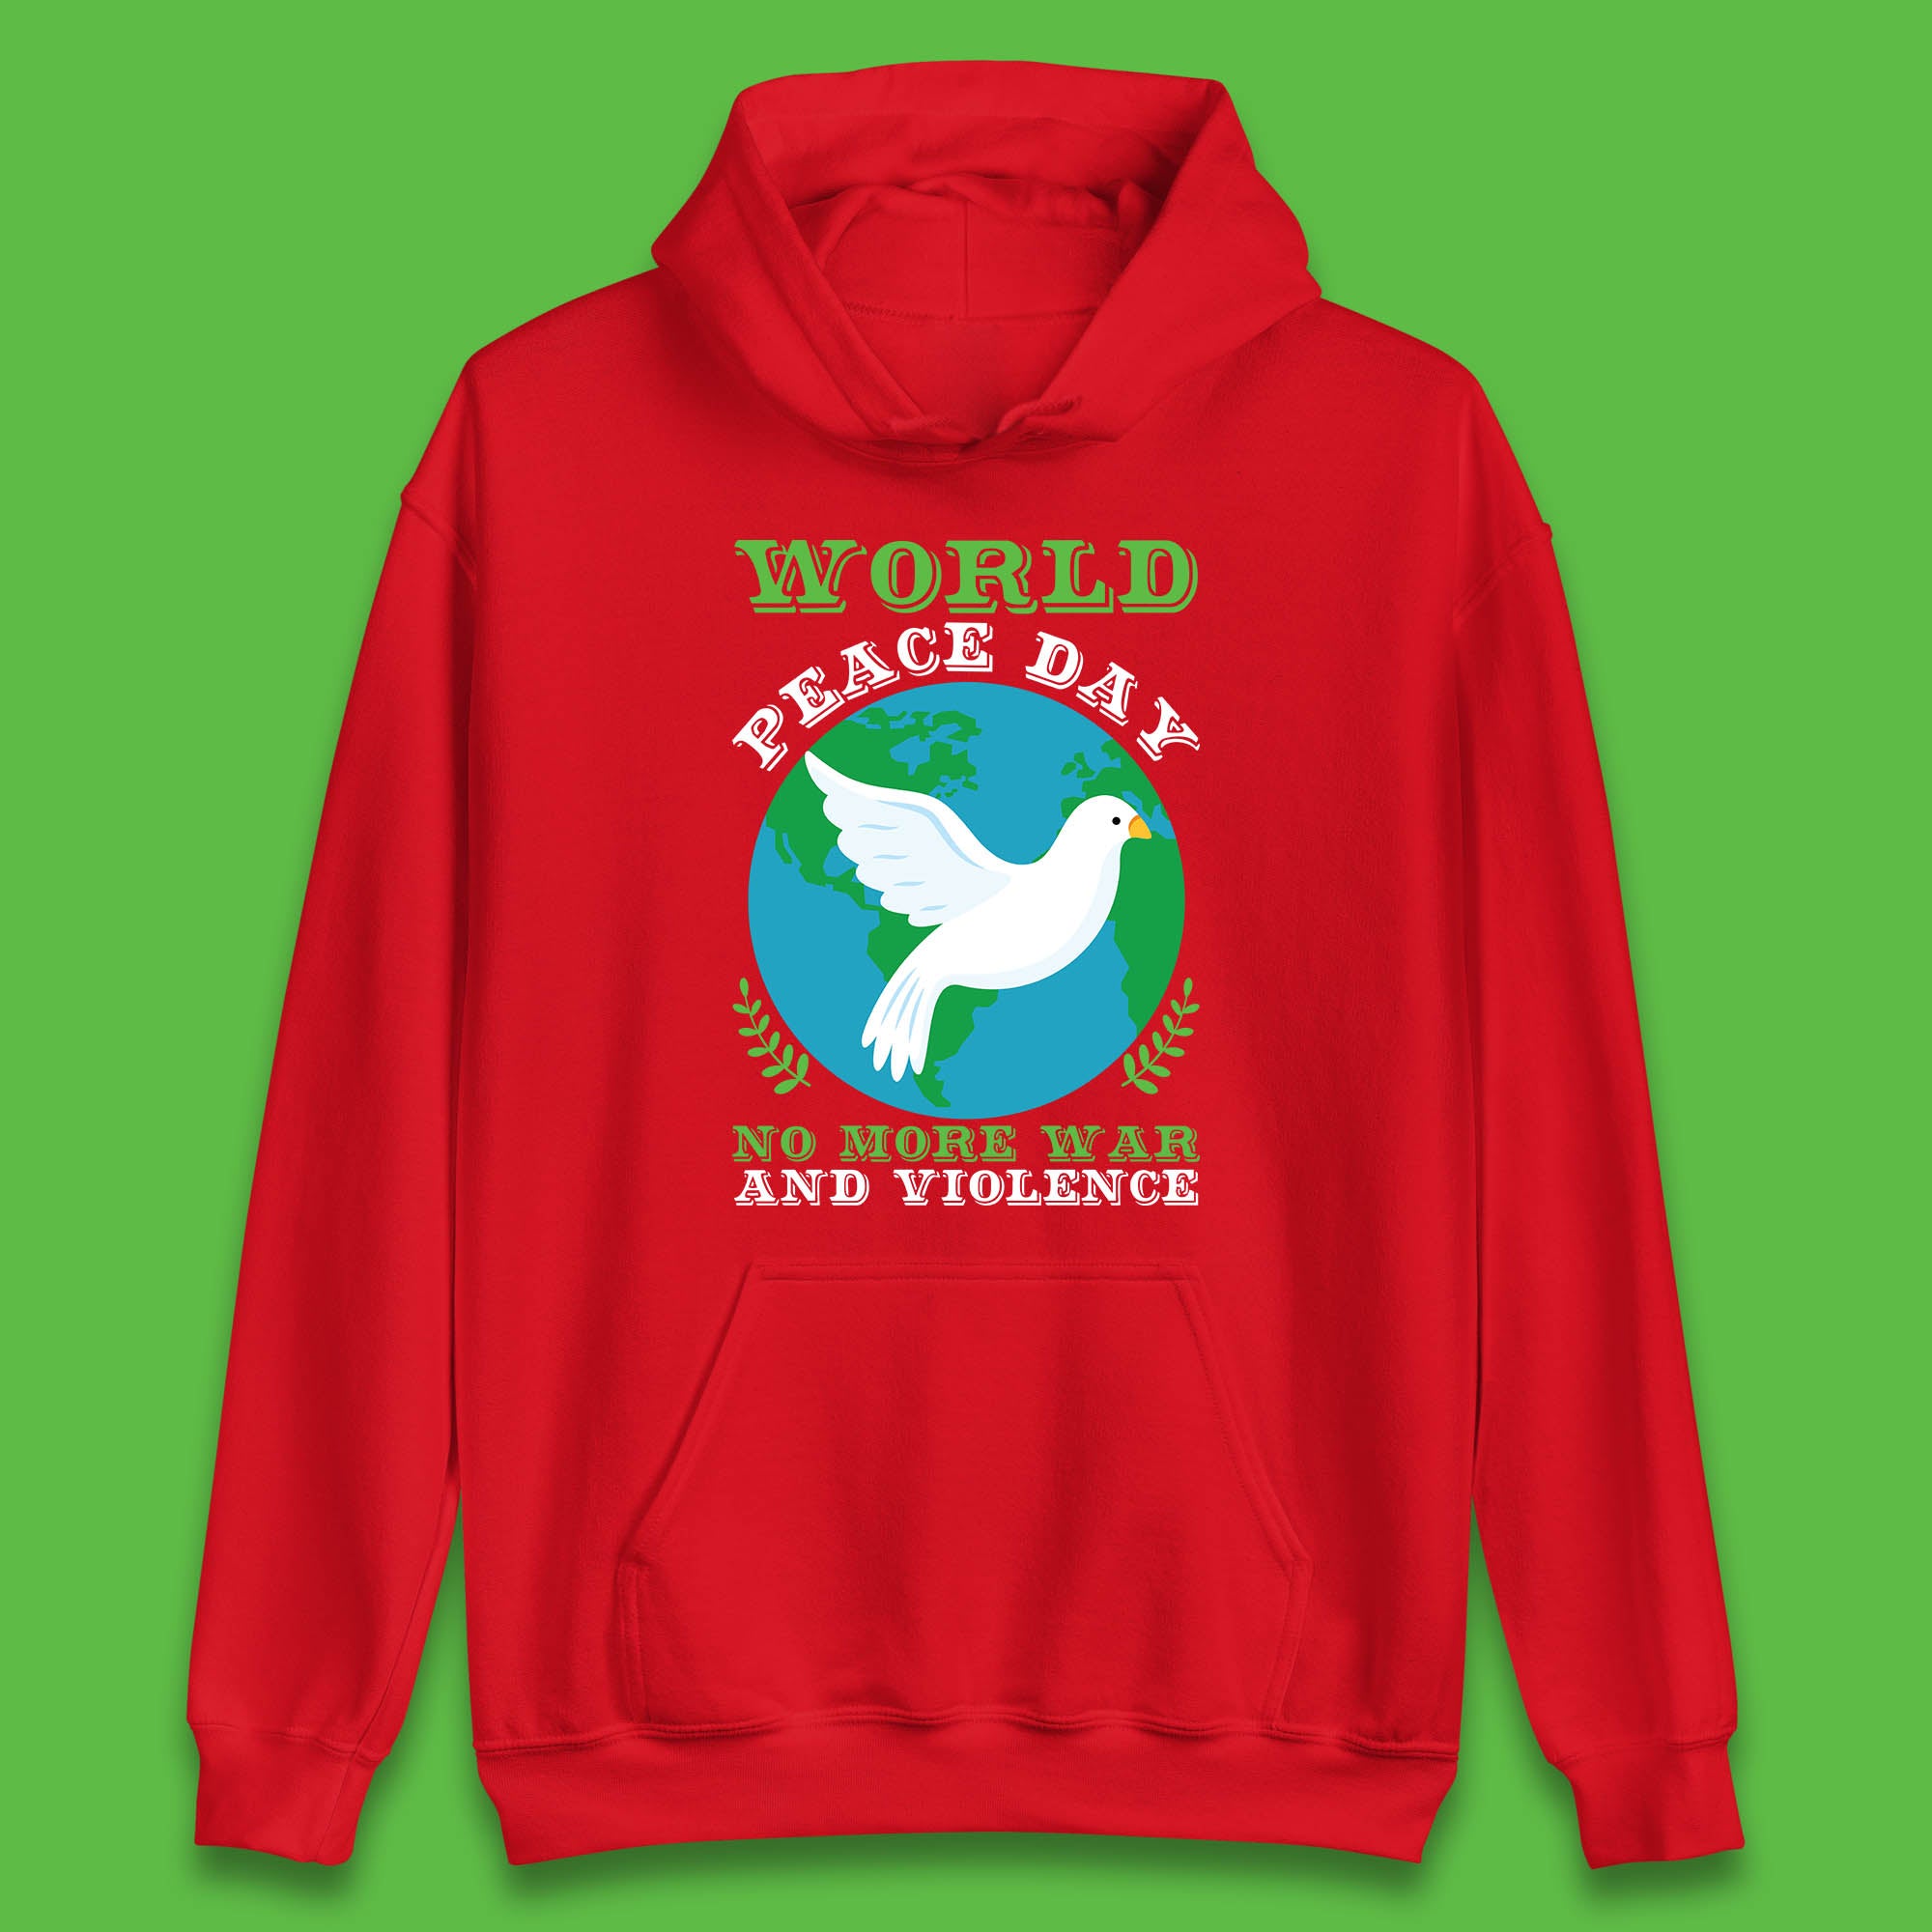 World Peace Day No More War And Violence Human Rights Stop War Unisex Hoodie